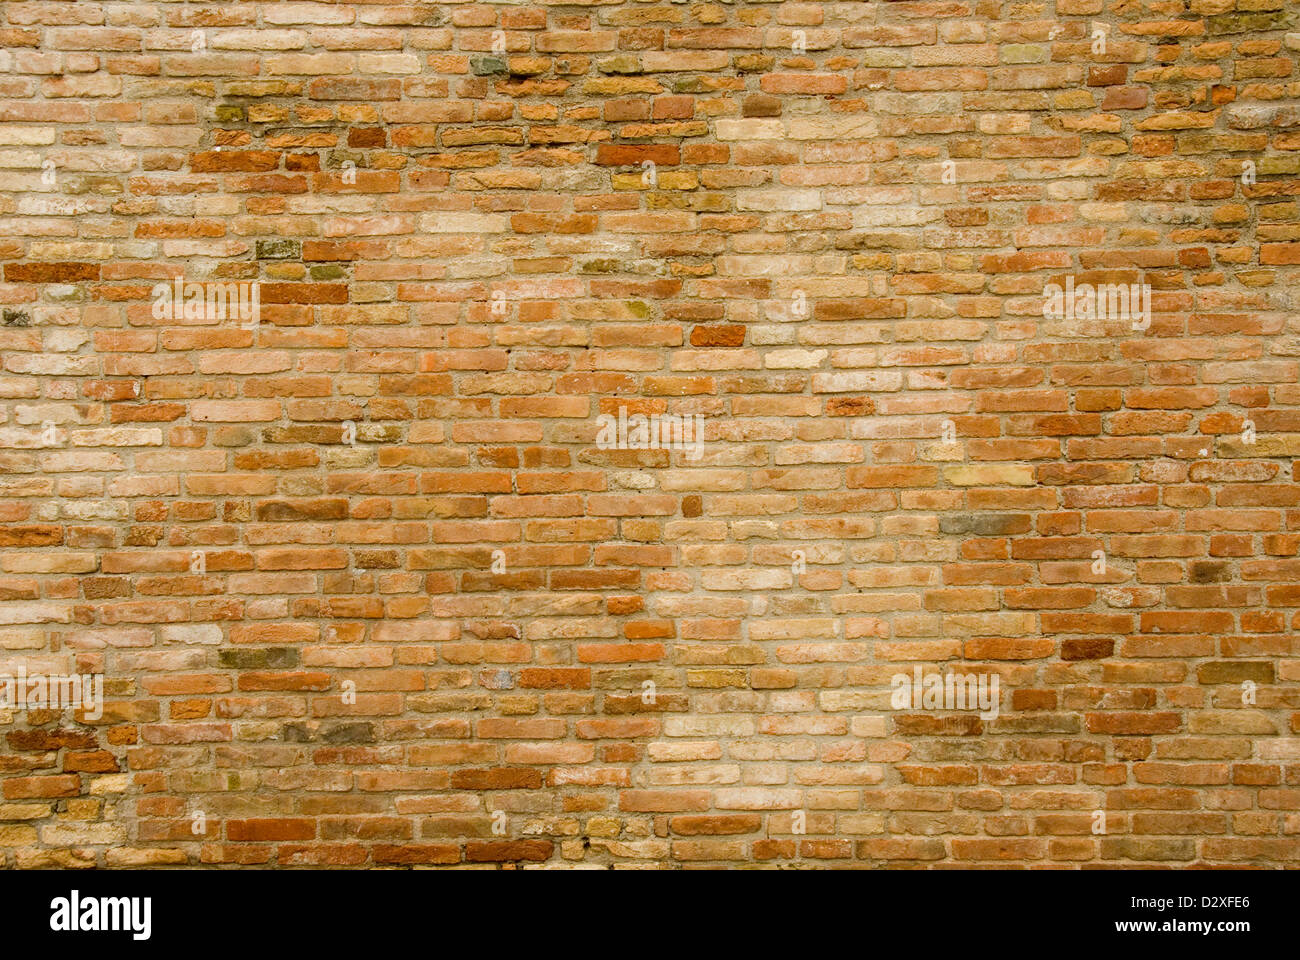 Background textured image of a brick wall taken in Venice Italy. Stock Photo